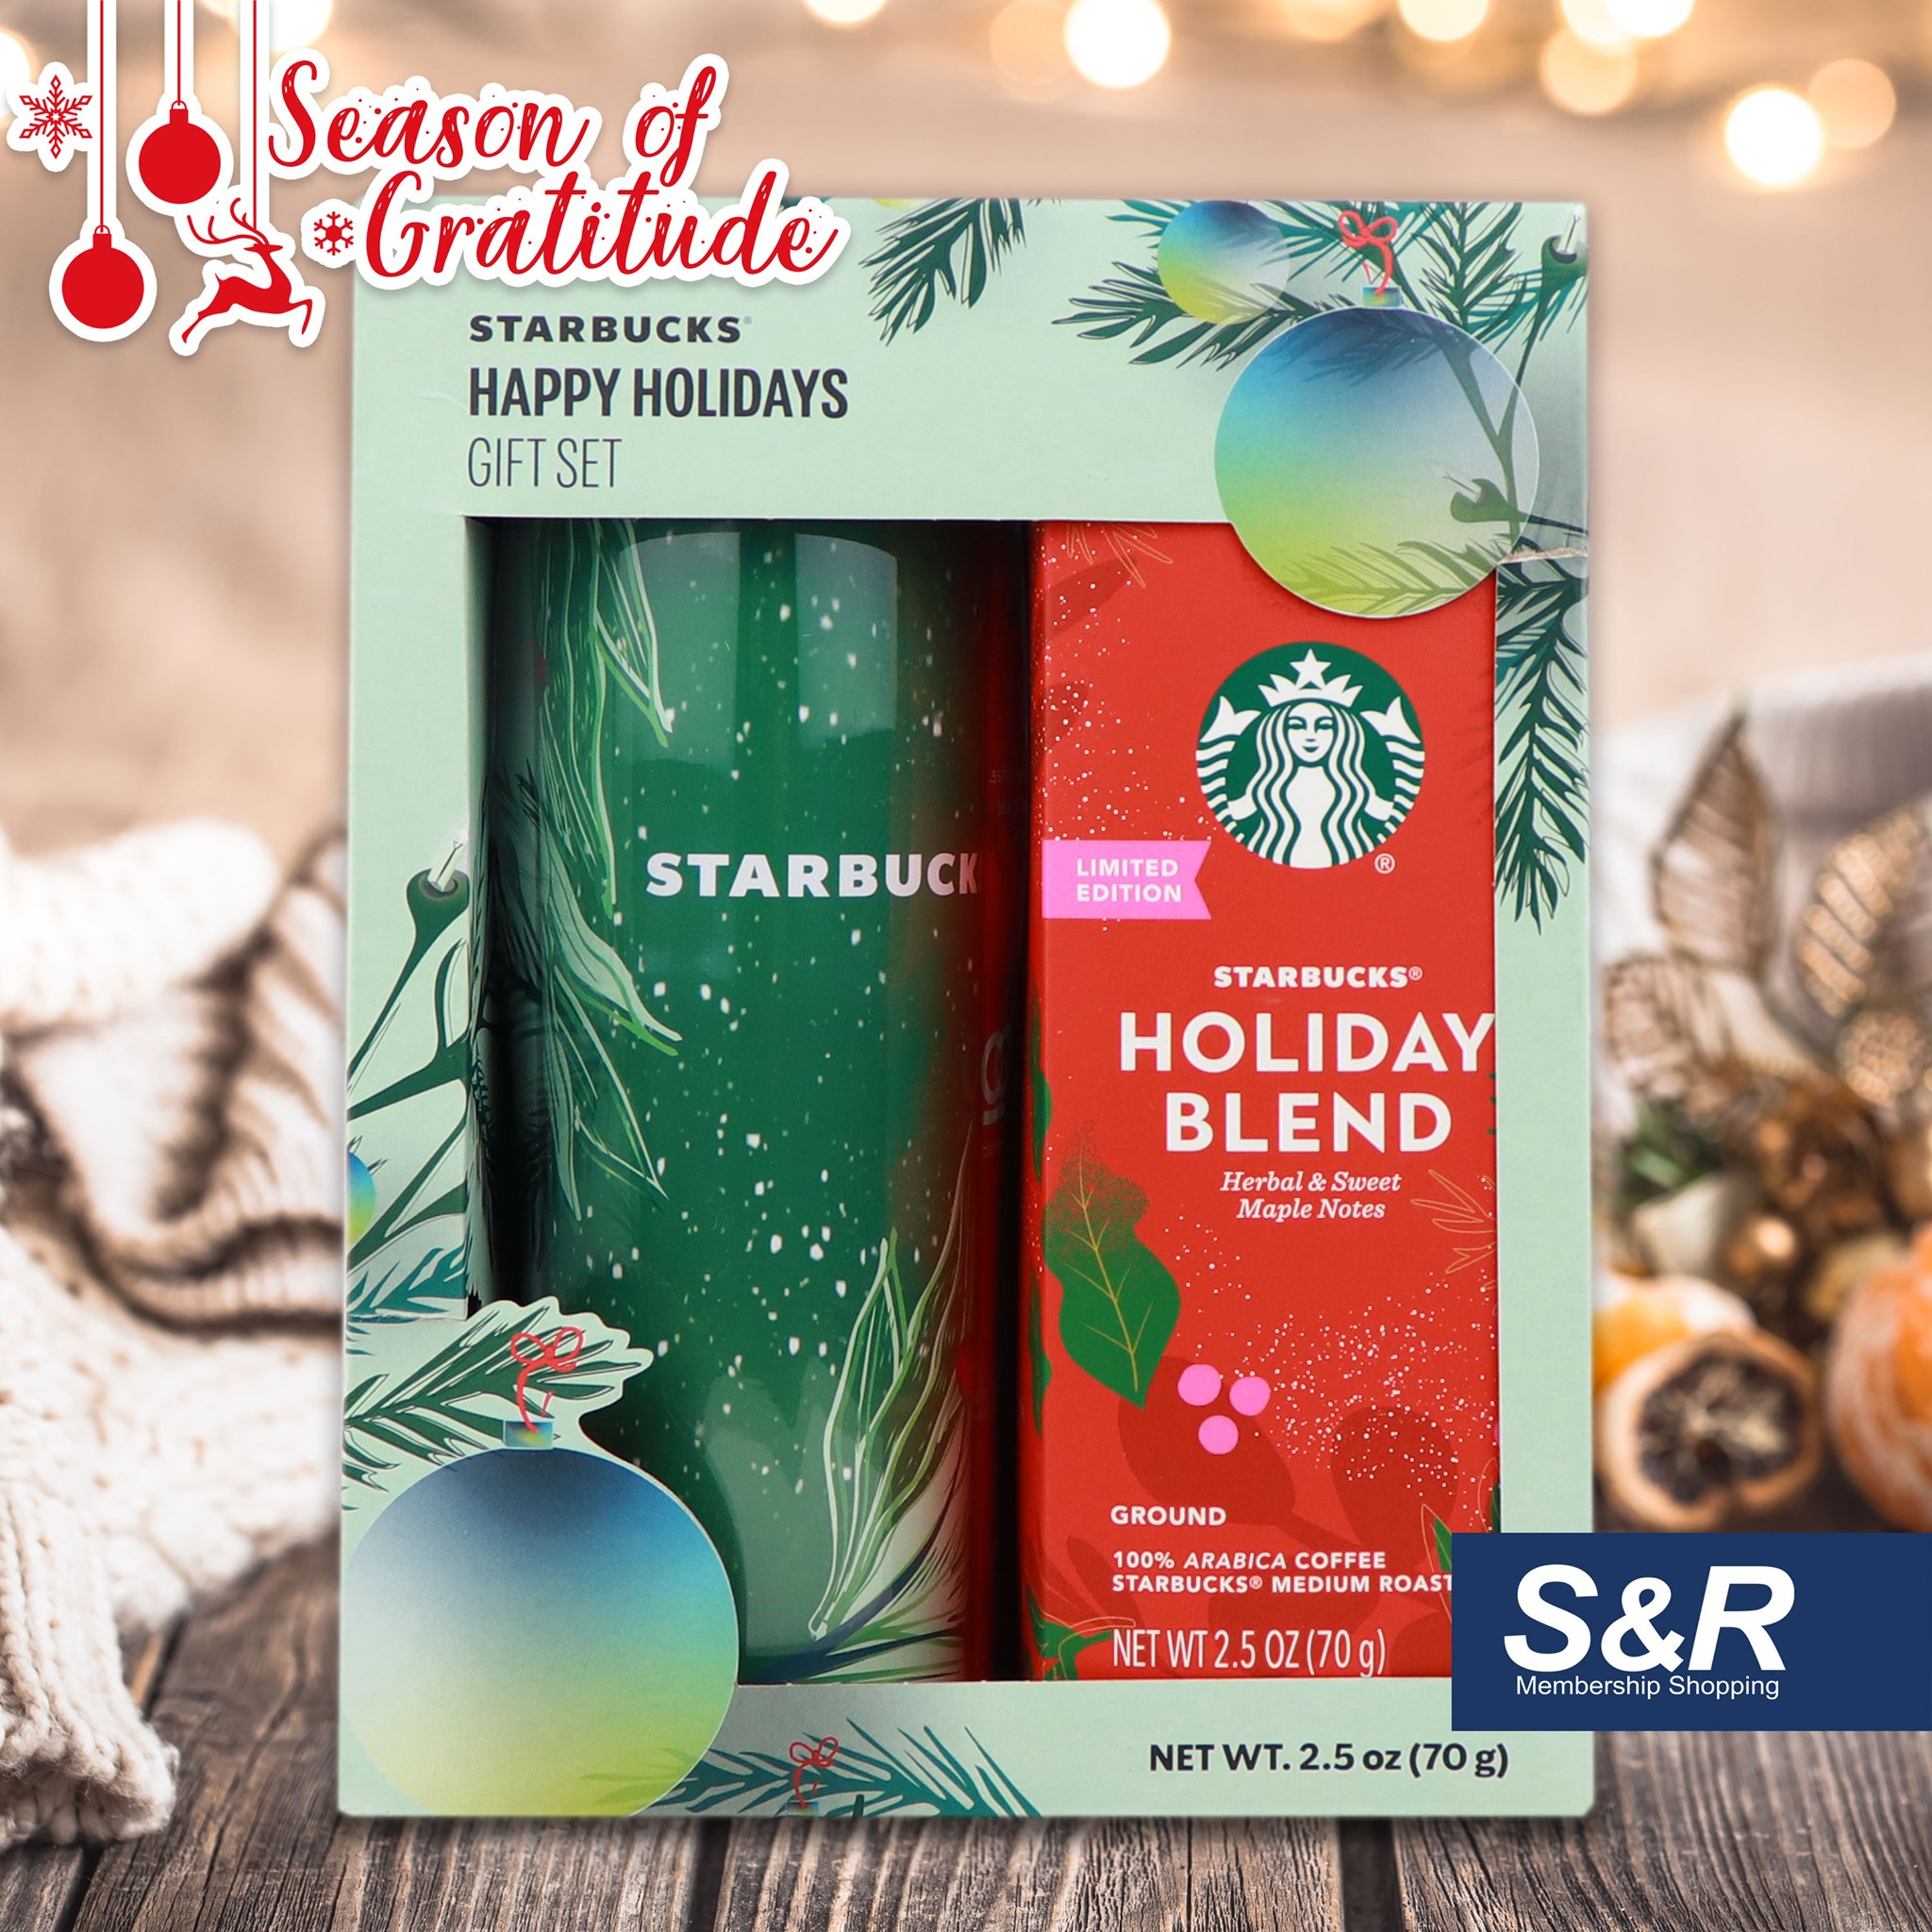 You Can Find These Starbucks Holiday Gift Sets In The Supermarket